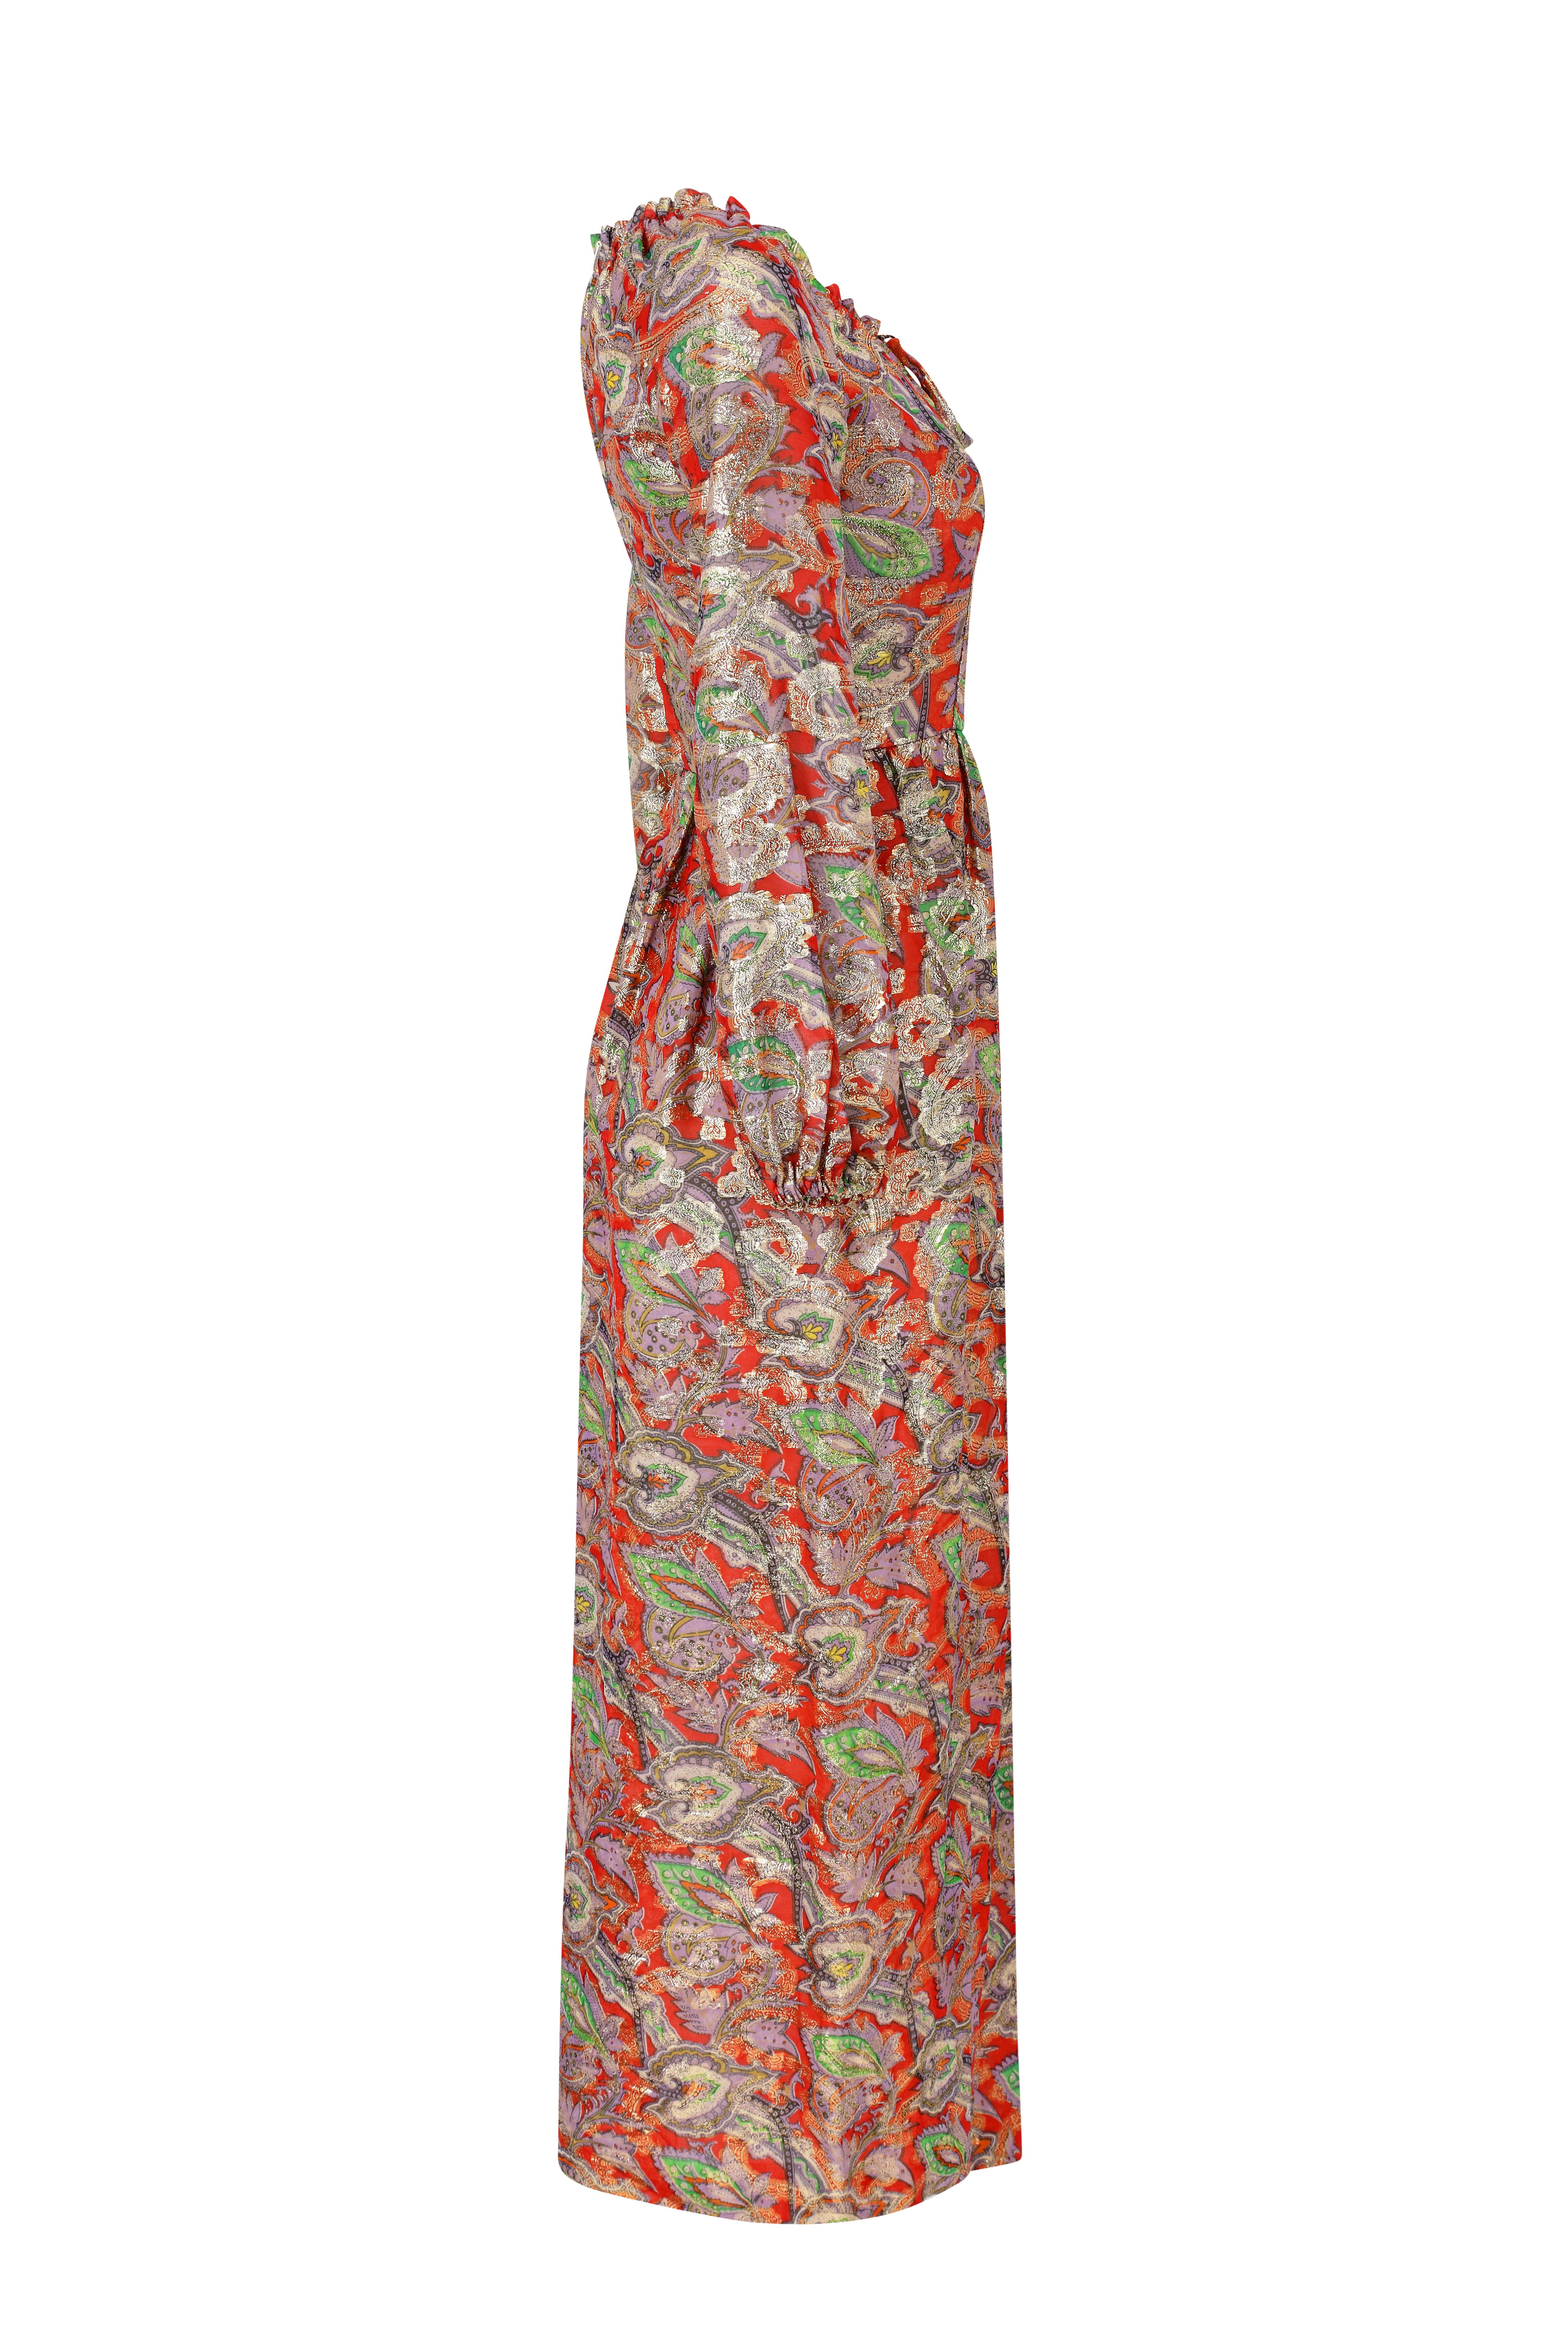 This sensational 1970s lamé paisley print maxi dress in gold, red, lilac and green is labelled Michael Modelle and is in excellent vintage condition. It has an opulent, bohemian aesthetic. The dress has a a gathered round neckline with draw string